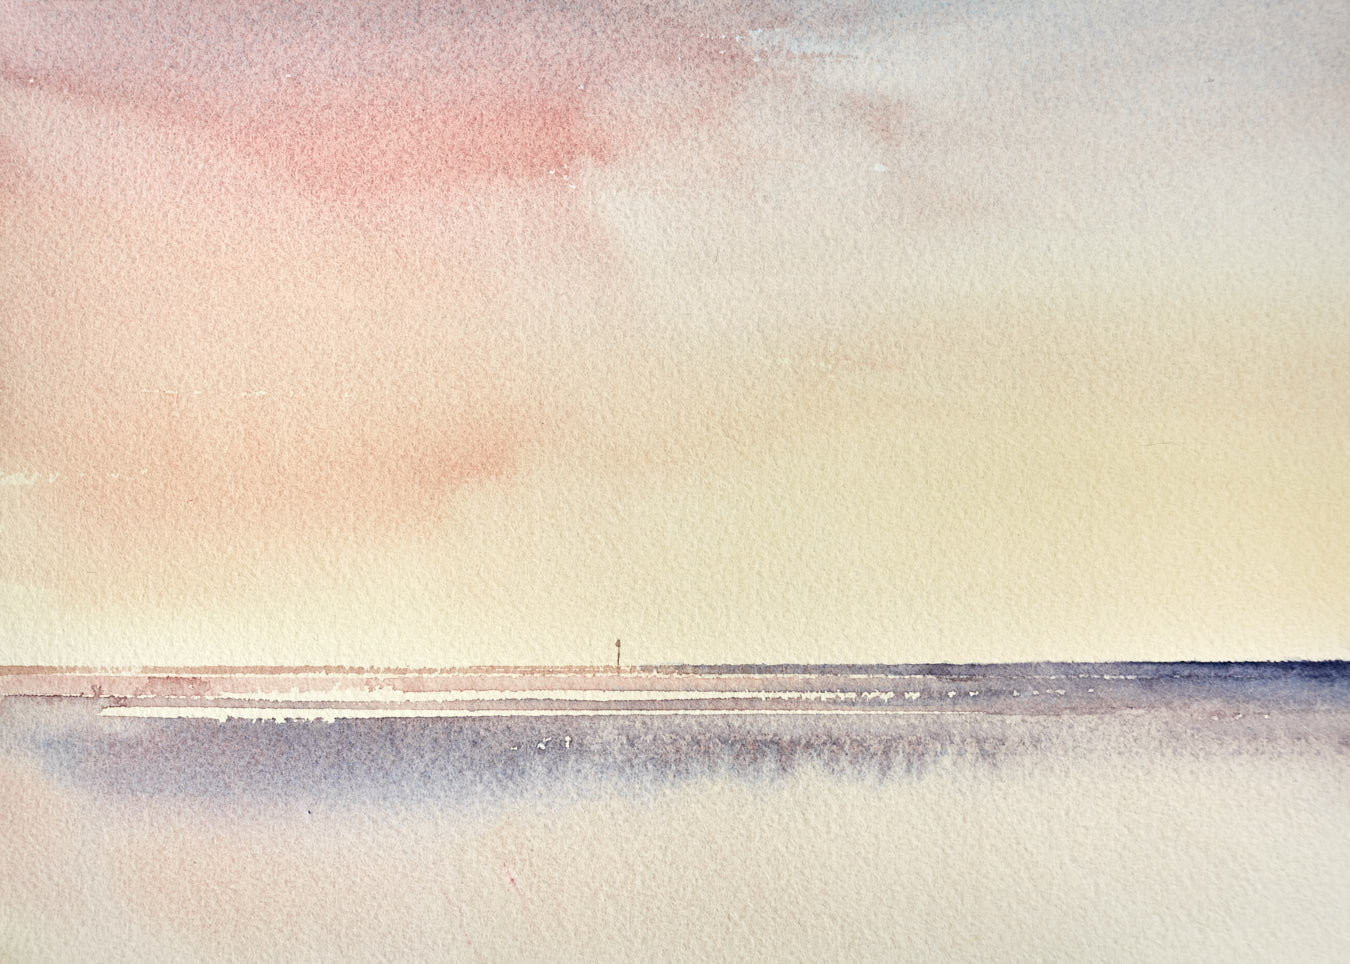 Large image of Twilight, St Annes-on-sea beach original watercolour painting by Timothy Gent